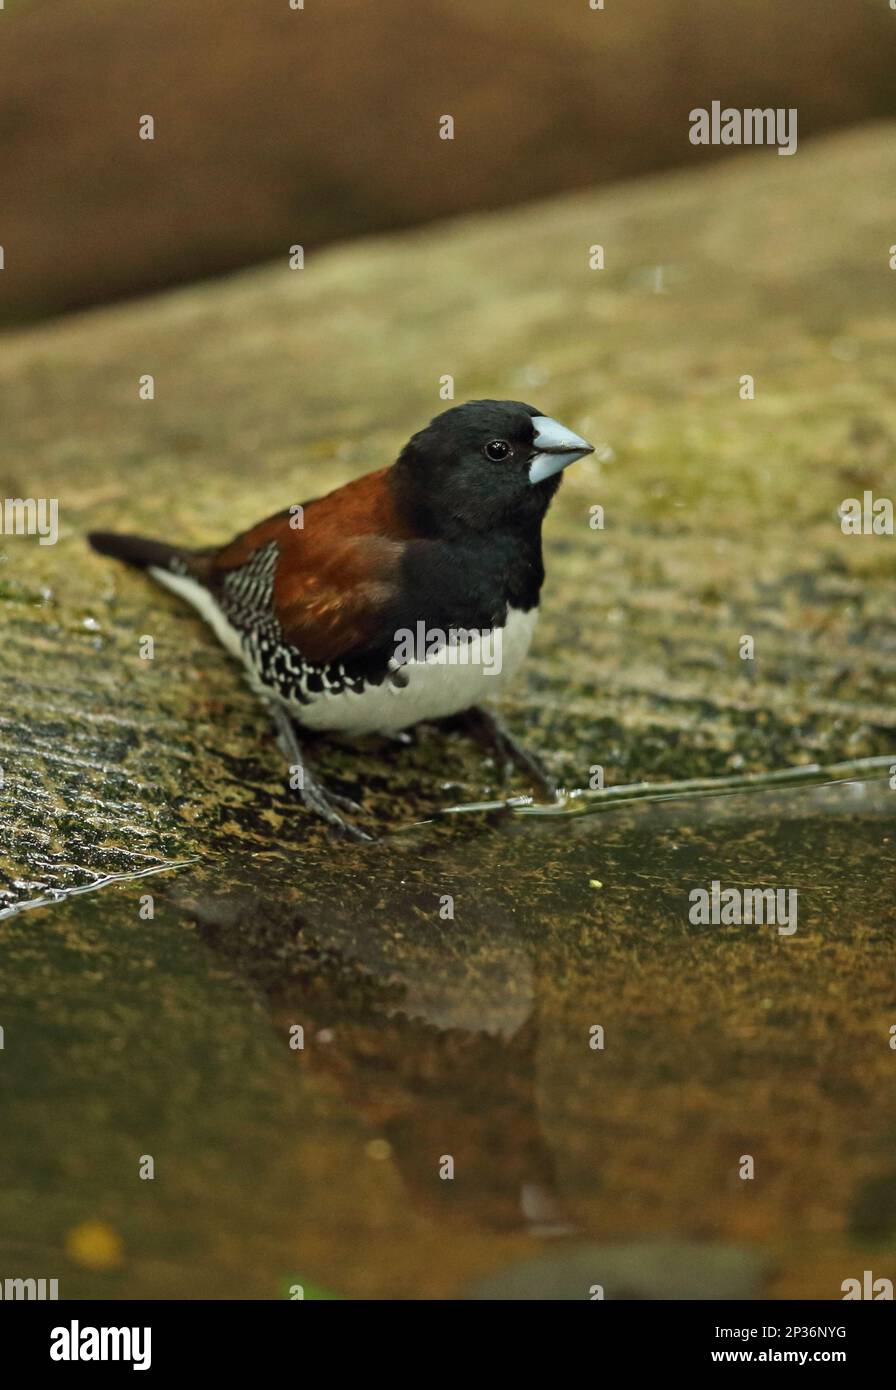 Bronze male, finches, songbirds, animals, birds, Red-backed Mannikin (Lonchura nigriceps) adult, drinking from pool, Dlinza Forest, Eshowe, Zululand Stock Photo